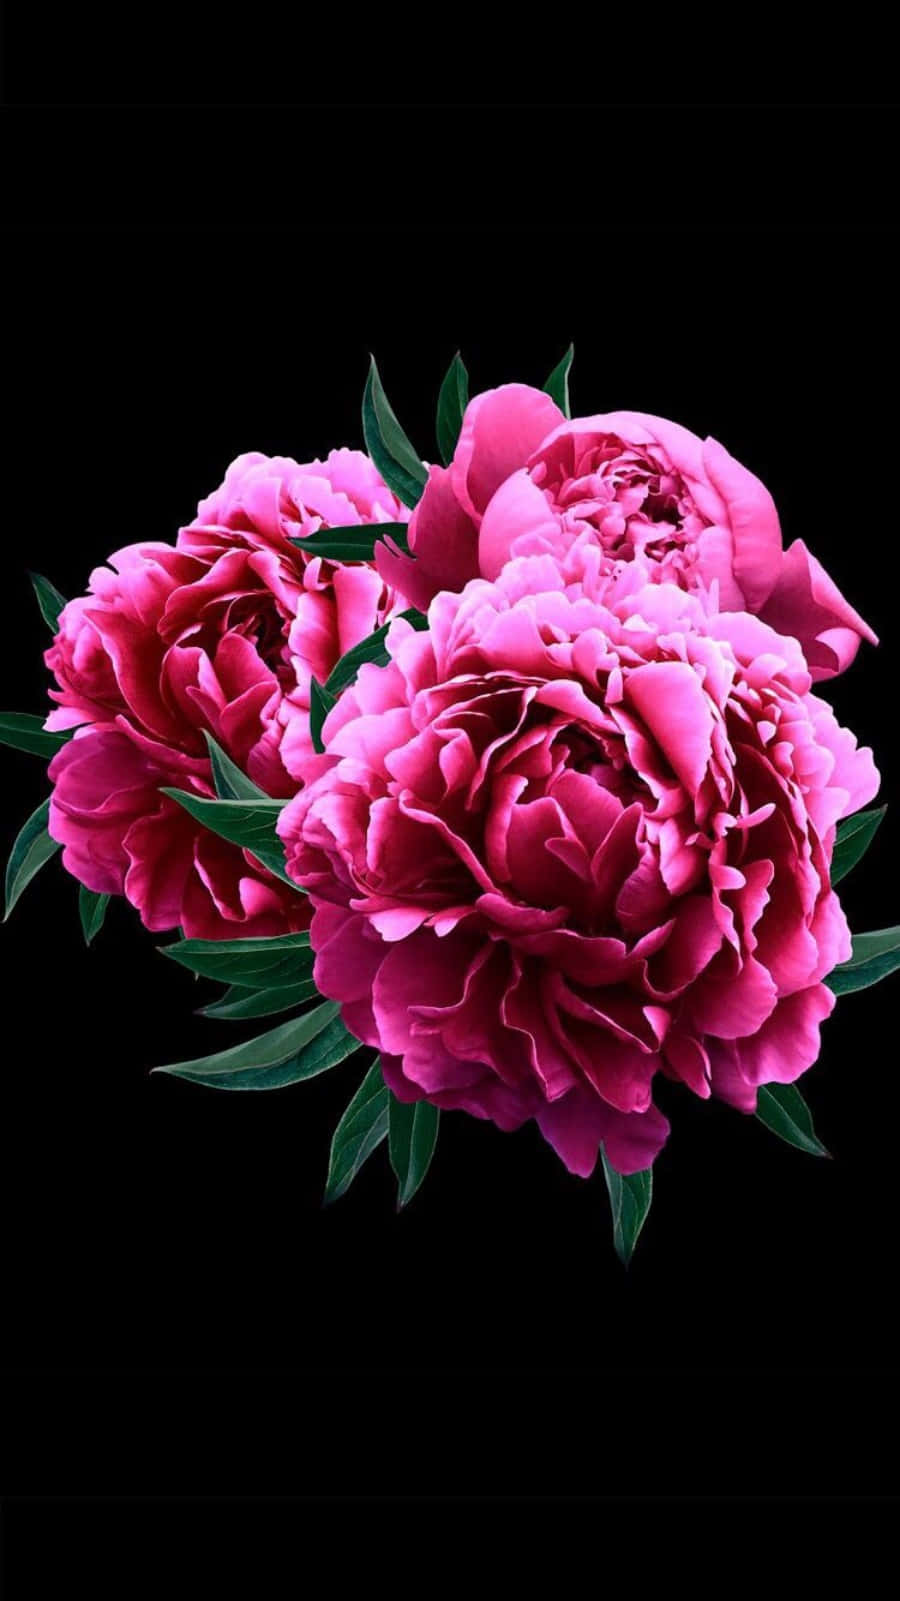 Enjoy the stunning bloom of pink peony flowers with the vibrant colors of your iPhone Wallpaper